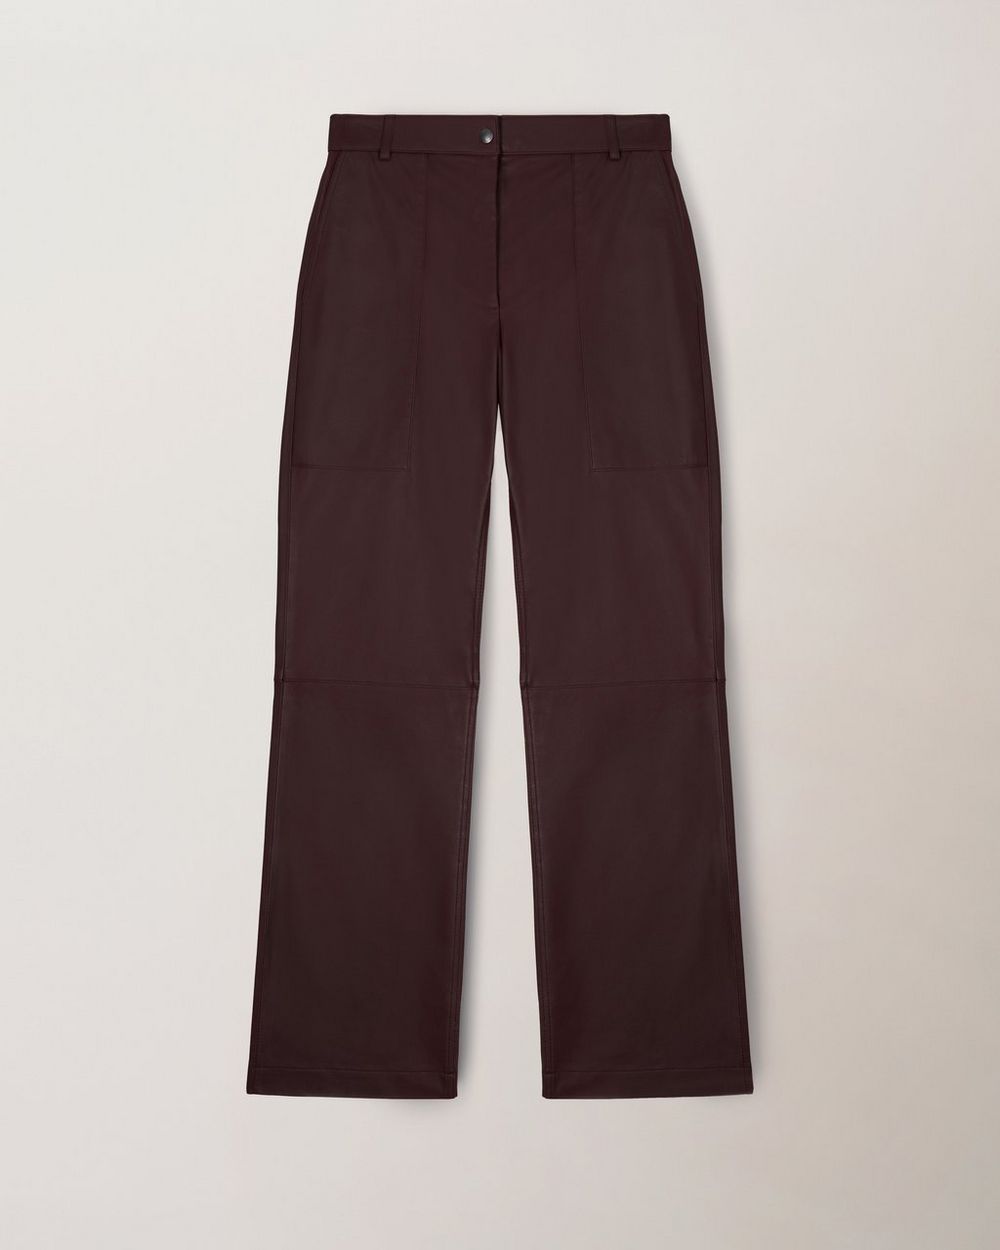 mulberry.com | Paul Smith Women's Leather Trousers